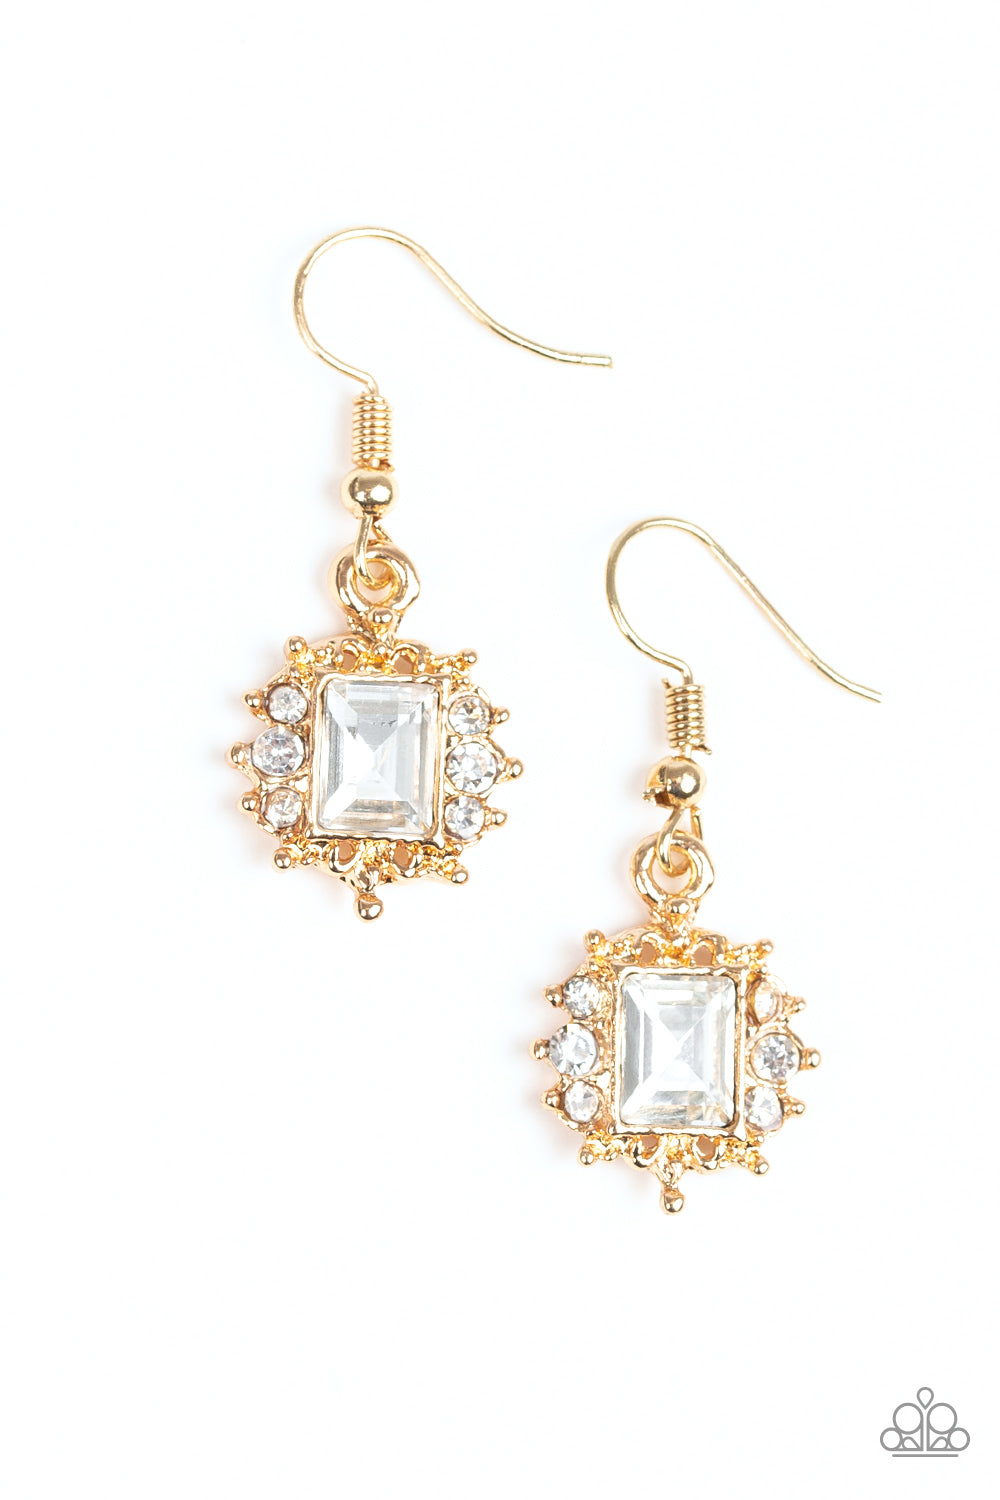 CANT STOP THE REIGN - GOLD CLEAR RHINESTONES EARRINGS